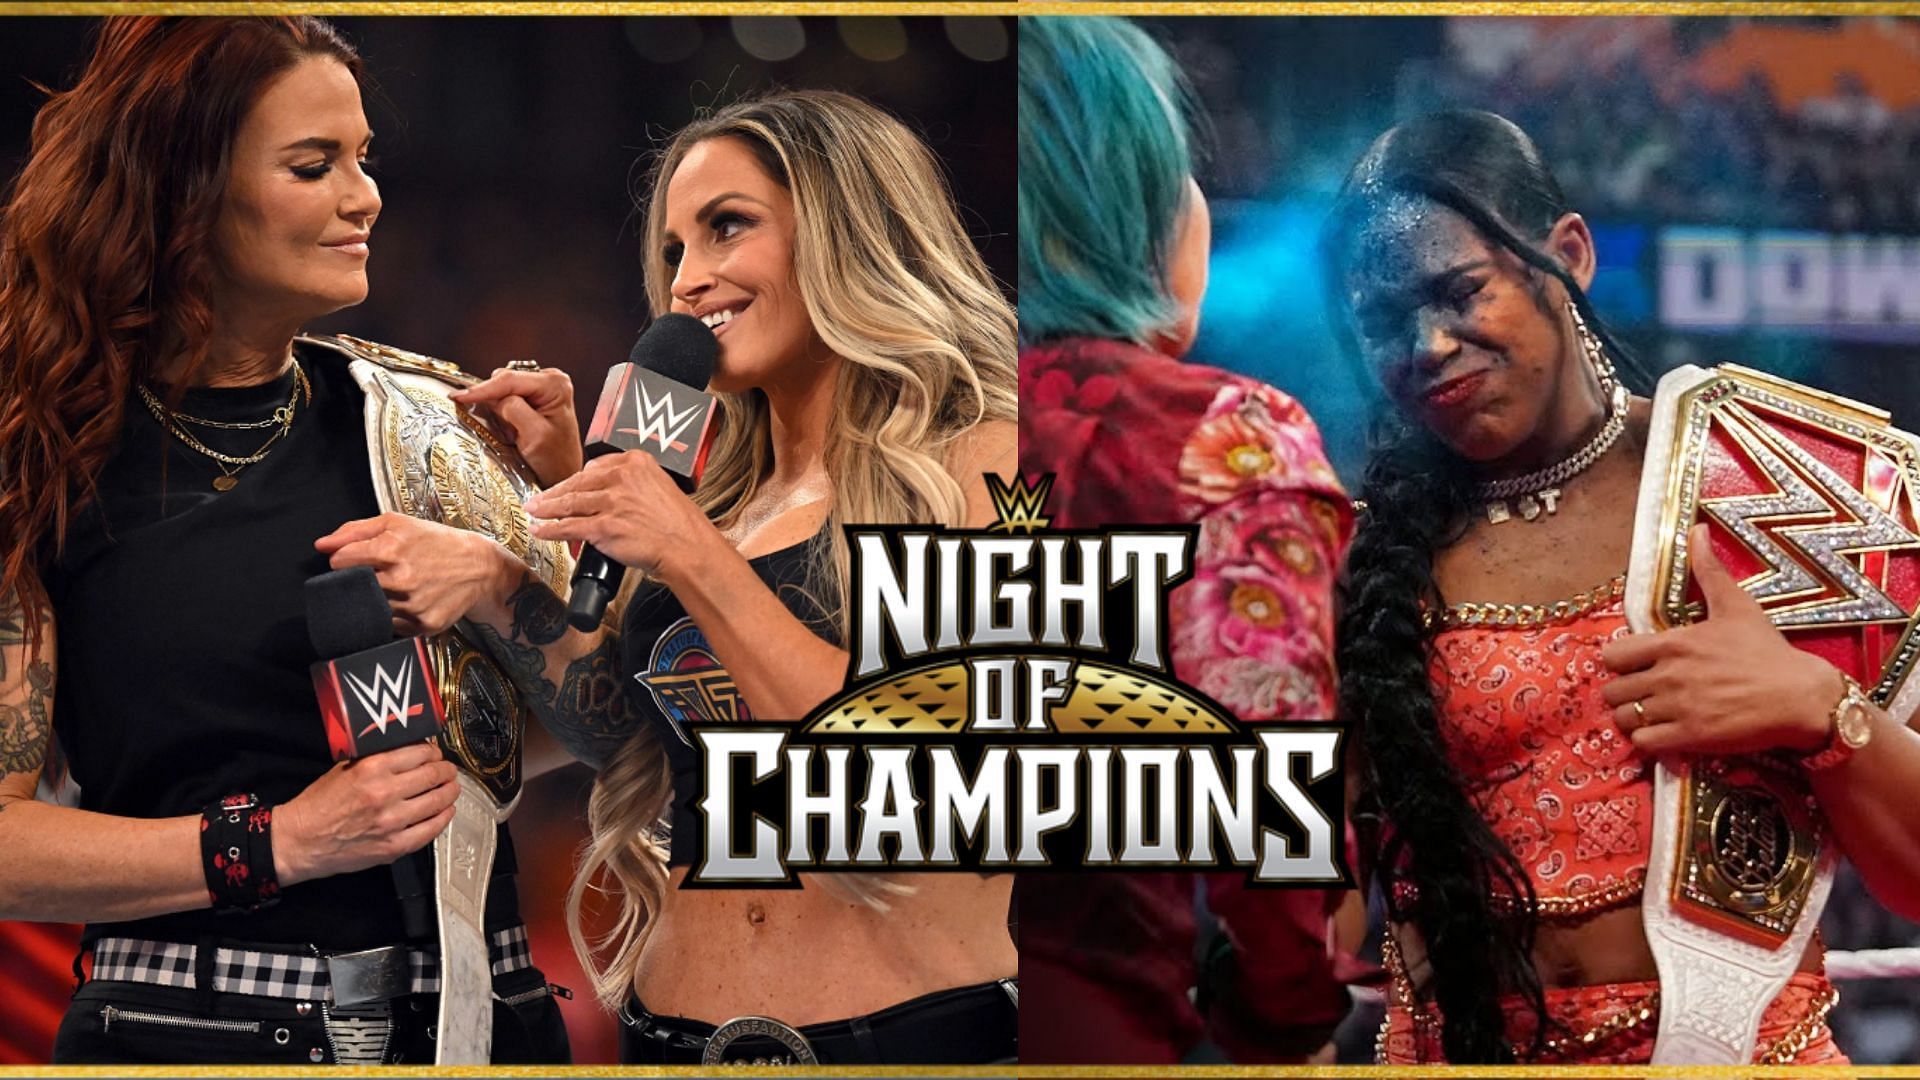 WWE Night of Champions 2023 is stacked with three main events